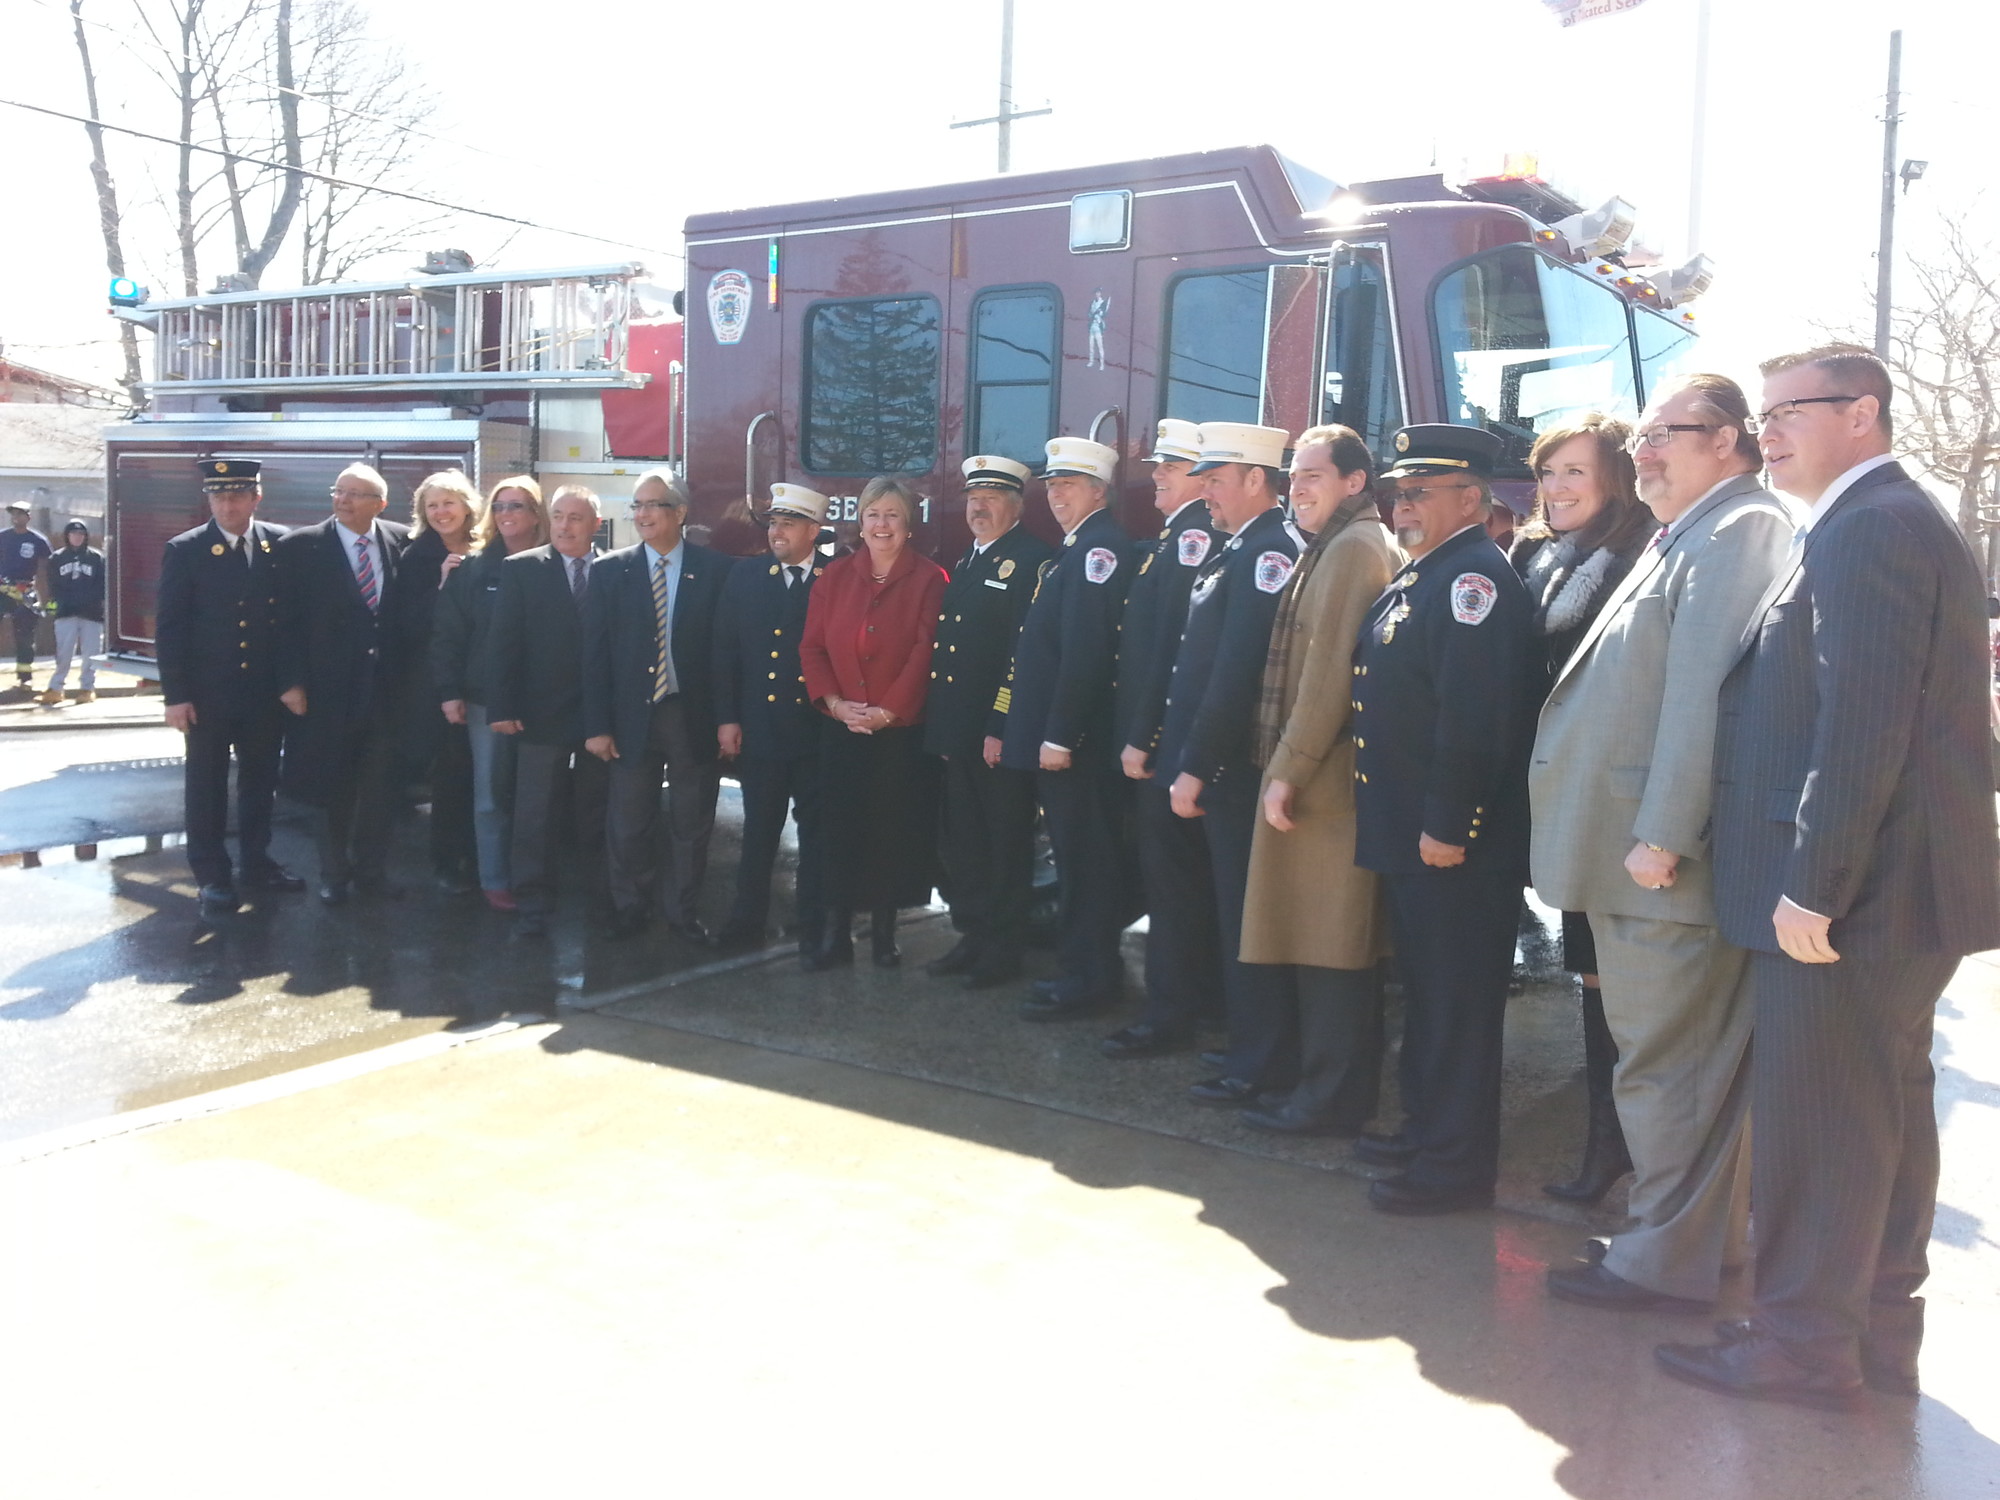 Chief Anthony D’Esposito (seventh from left) and members of the Island Park Fire Department were joined by U.S. Rep. Kathleen Rice, former Sen. Alfonse D’Amato, State Assemblyman Todd Kaminsky, County Legislator Denise Ford, Town of Hempstead Supervisor Kate Murray and Councilman Anthony Santino, Island Park Mayor Michael McGinty, Deputy Mayor Steve D’Esposito, and Trustees Irene Naudus and Matthew Paccione in welcoming new fire engine 225 to Island Park.